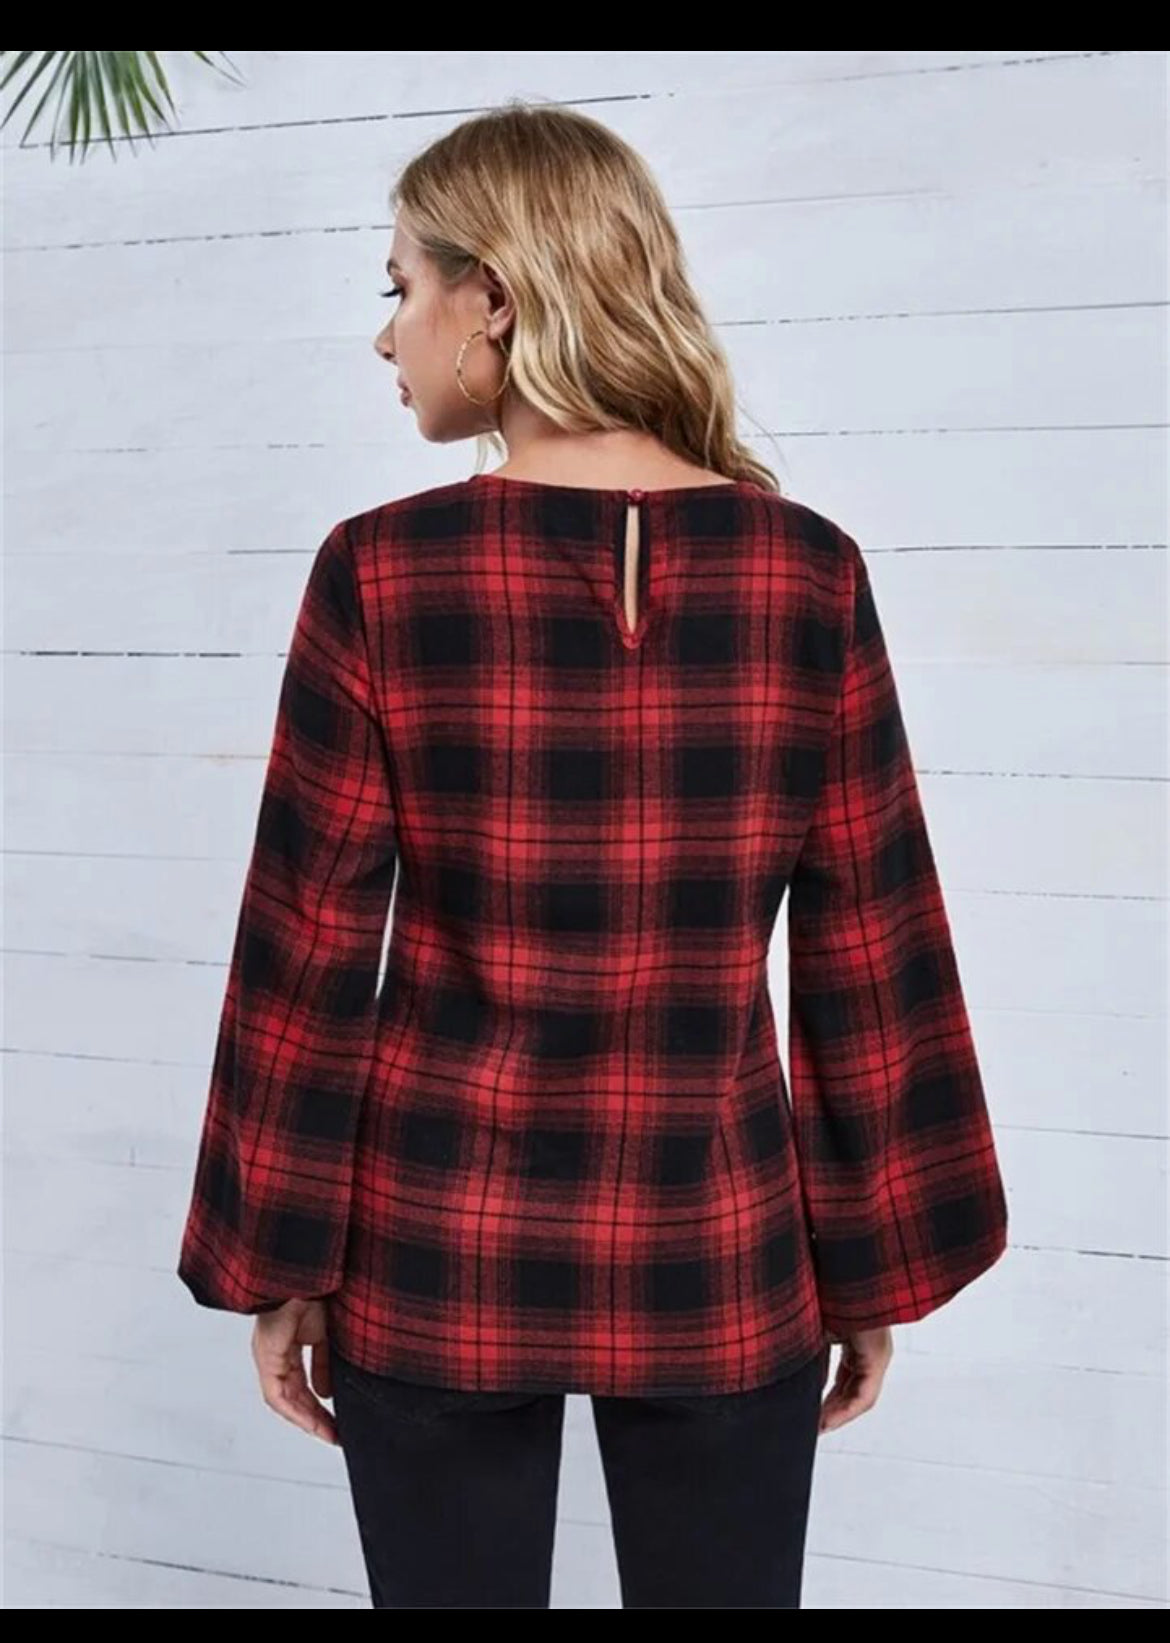 Women's European and American maternity wear autumn red plaid top